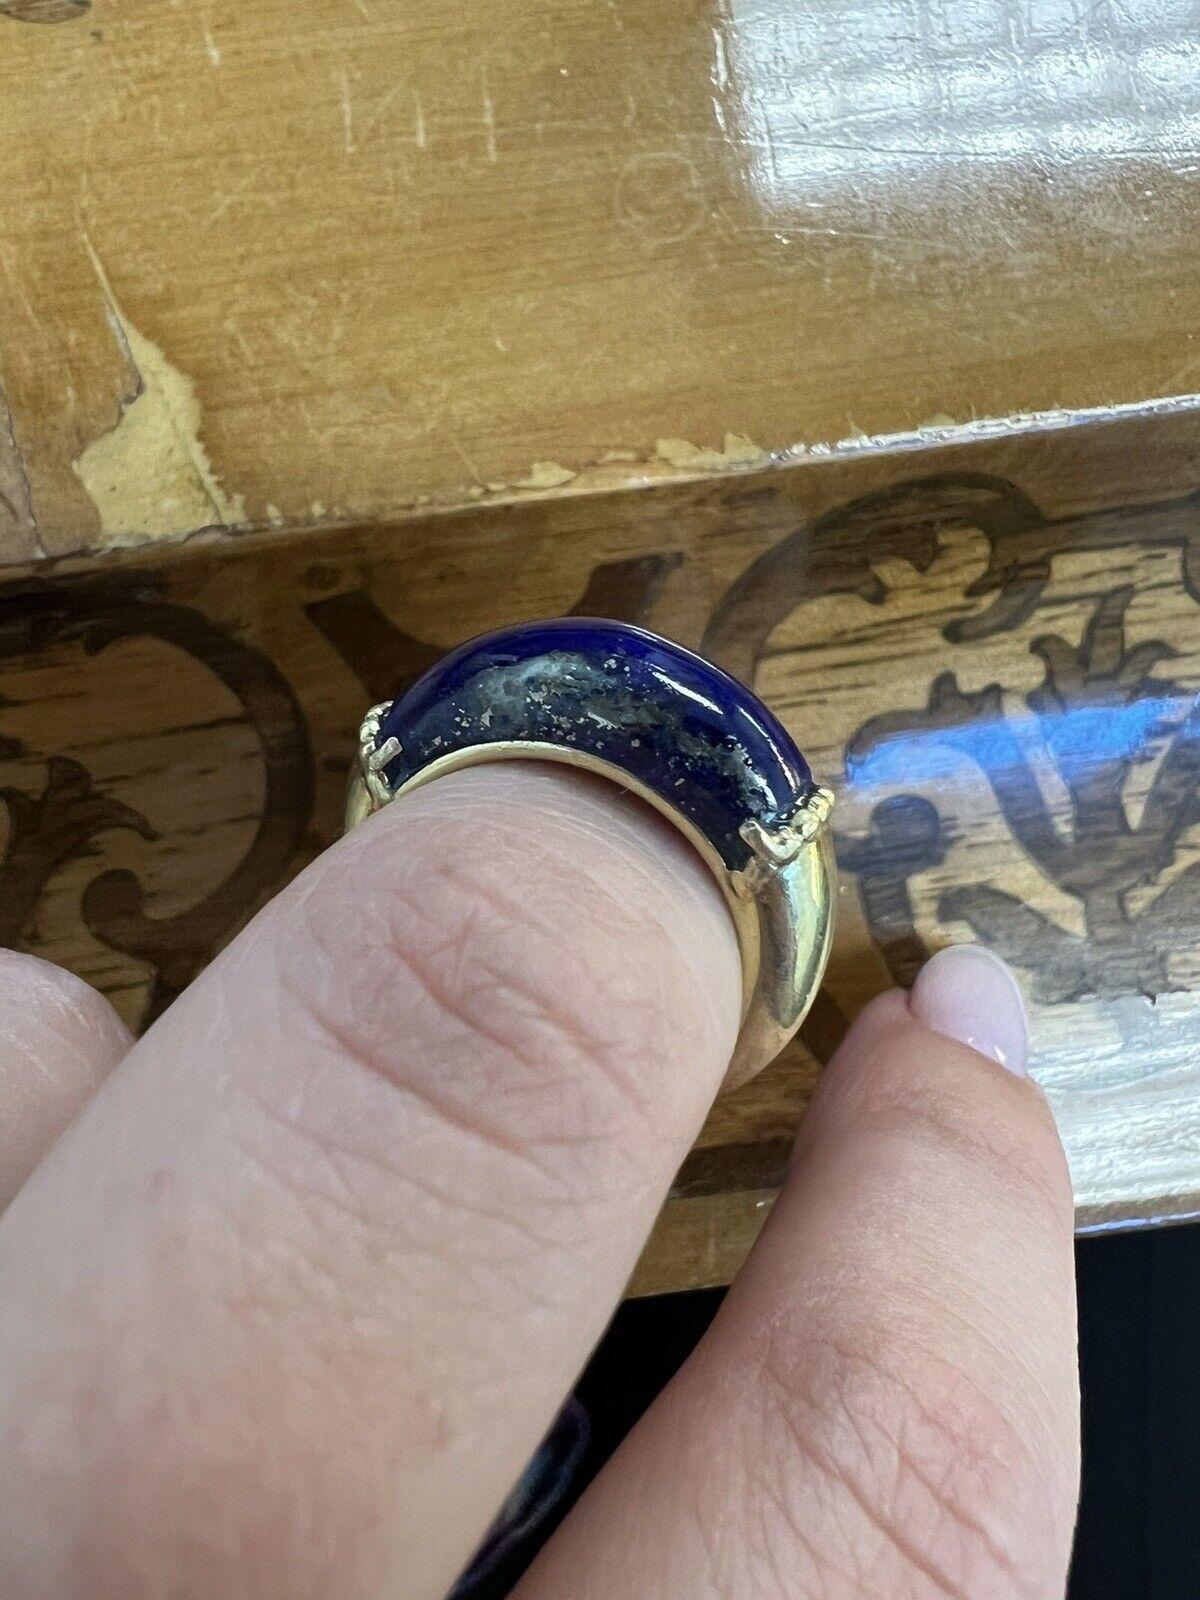 Tiffany & Co. 18k Yellow Gold & Lapis Ring Vintage Circa 1970s

Here is your chance to purchase a beautiful and highly collectible designer ring.  

The ring is from the 1970s, made by Tiffany & Co.  The ring size is 6 and the weight is 5.1 grams. 